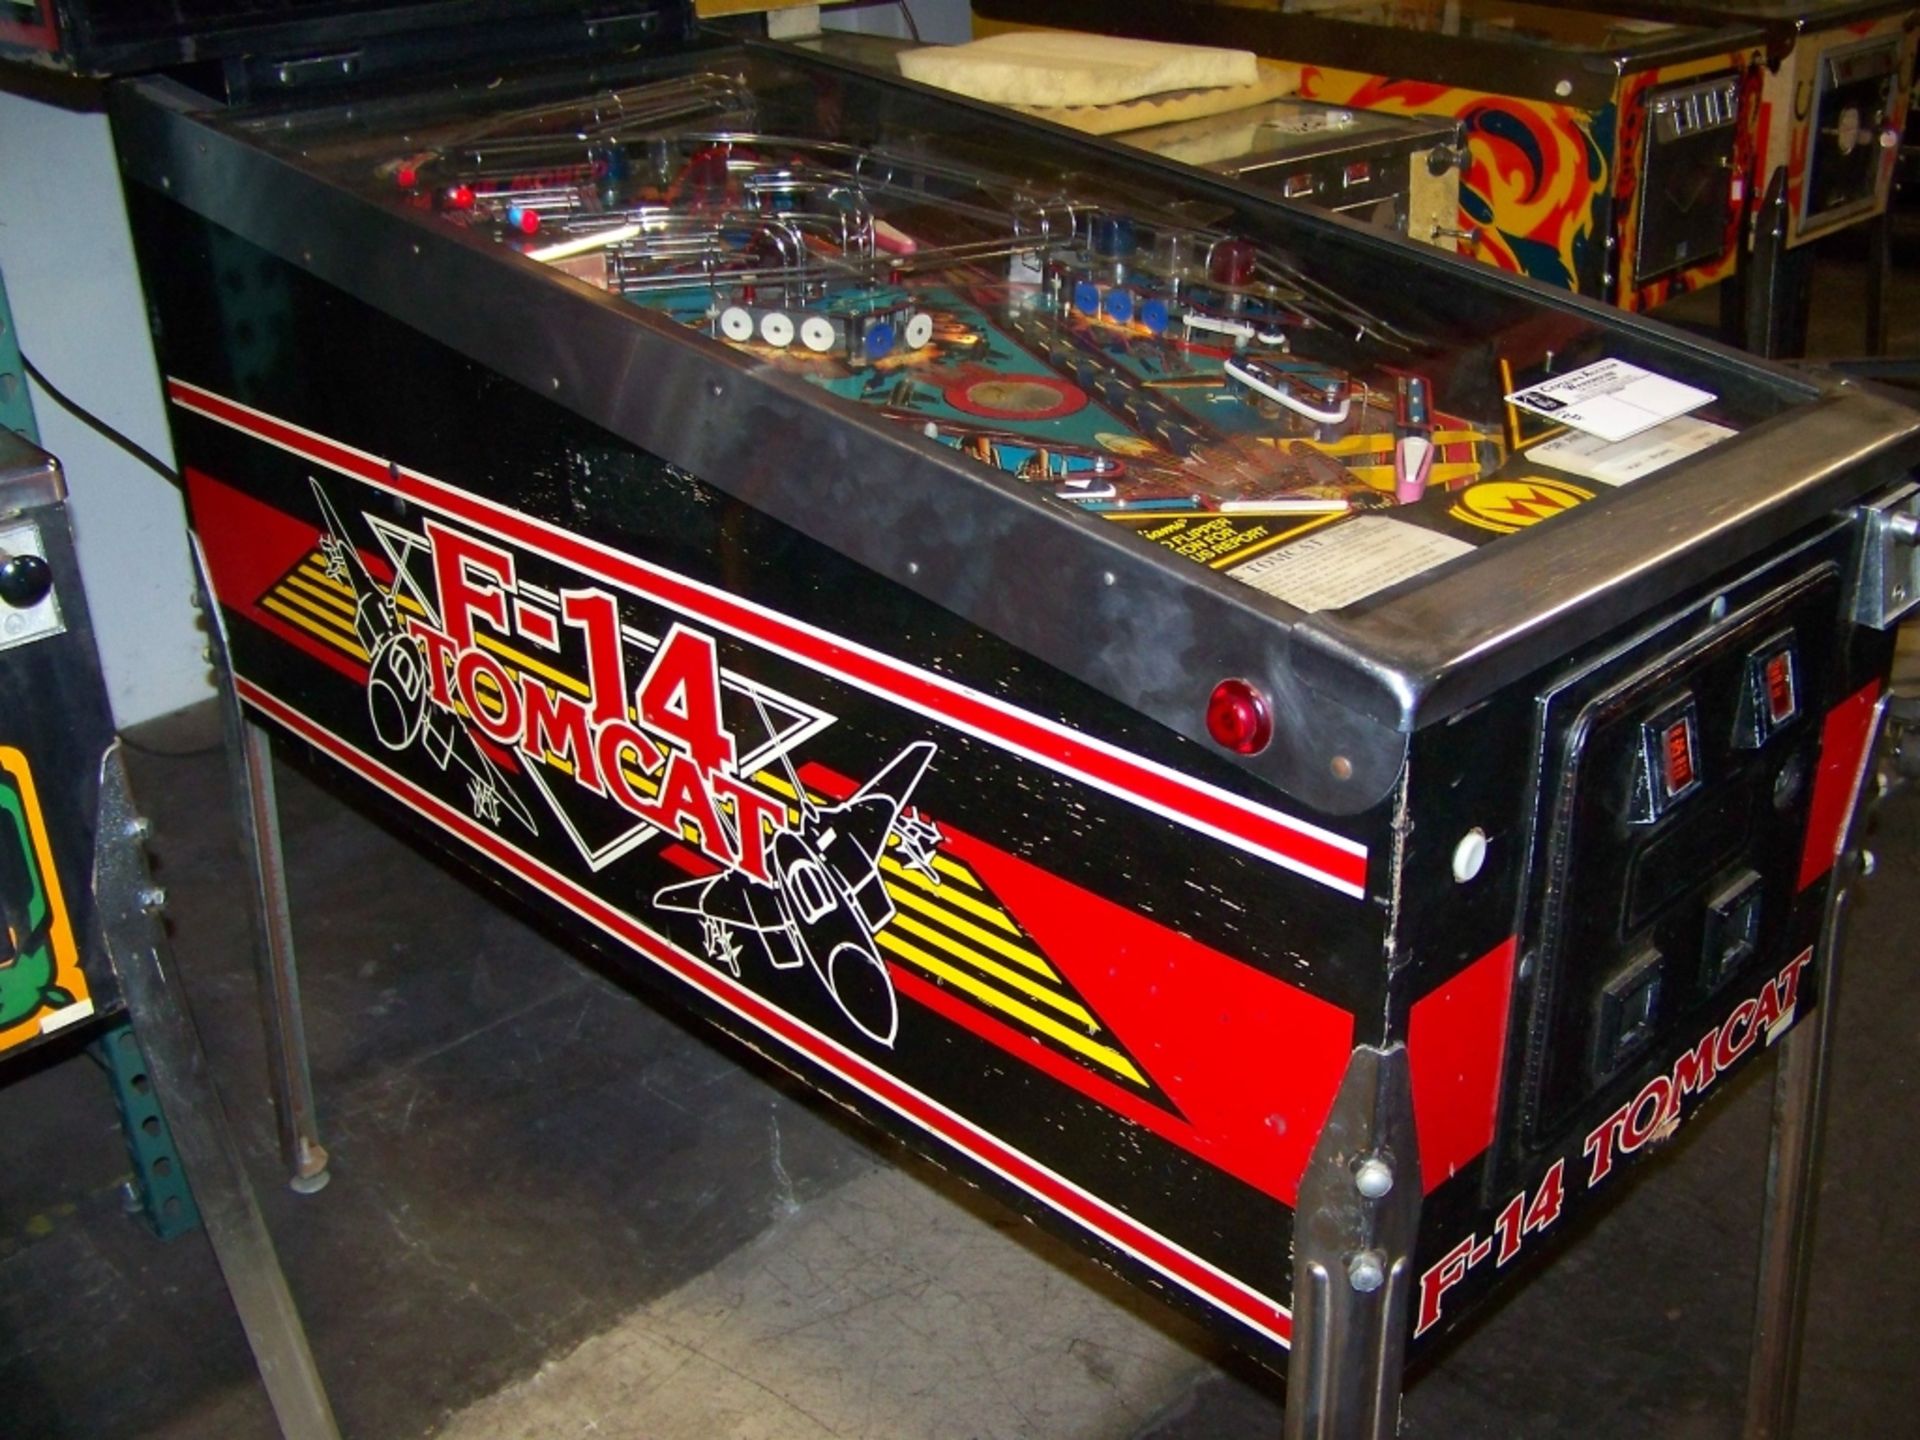 F-14 TOMCAT PINBALL MACHINE WILLIAMS 1987 Item is in used condition. Evidence of wear and commercial - Image 4 of 9